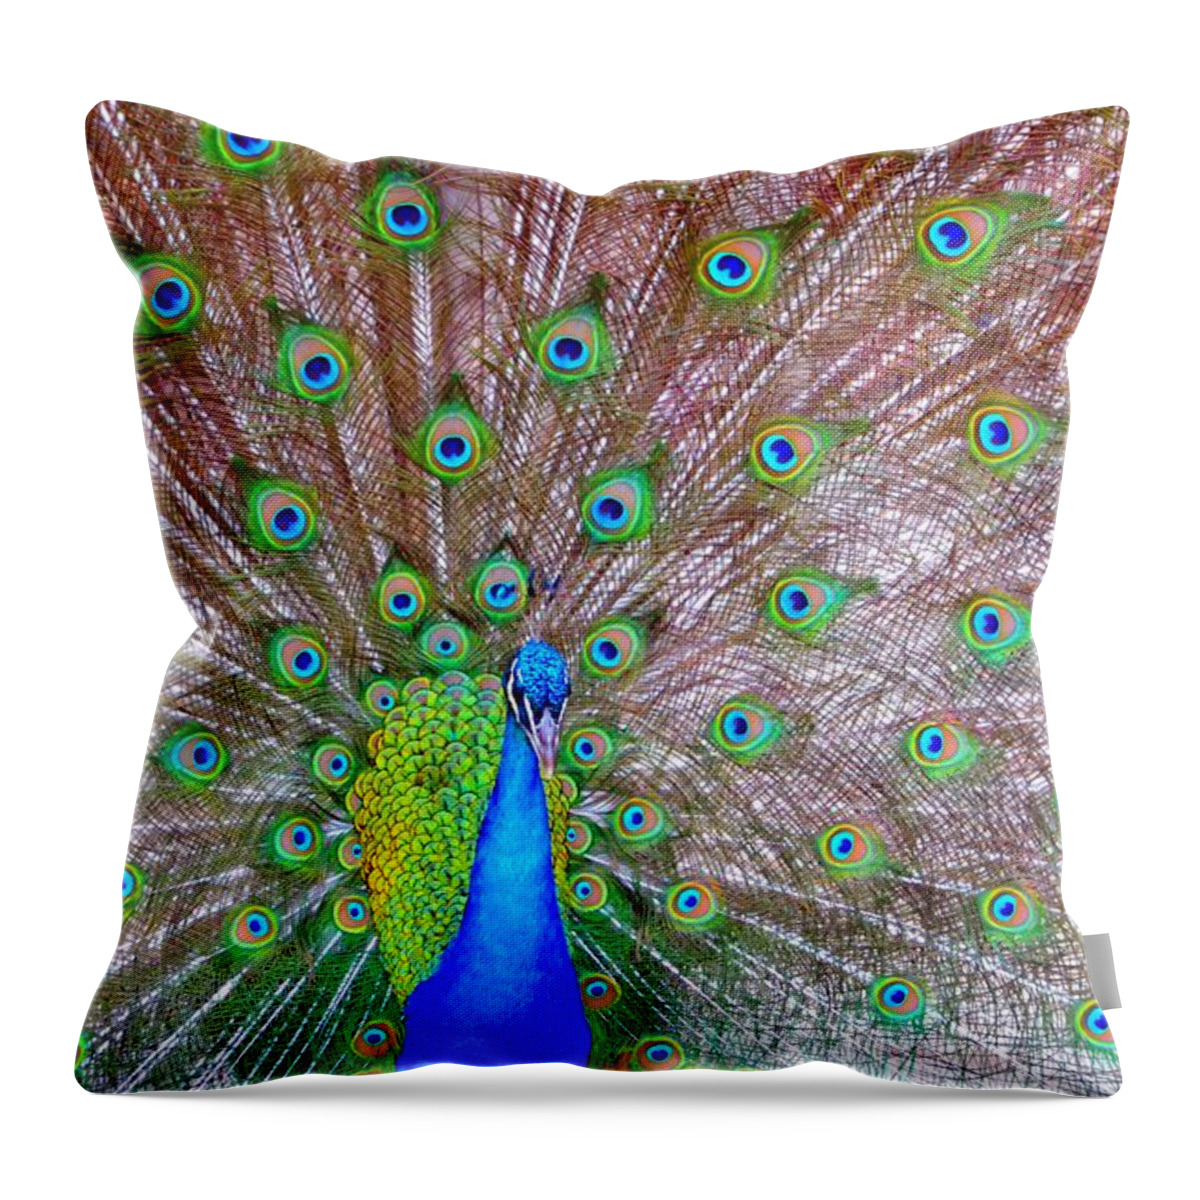 Peacock Throw Pillow featuring the photograph Indian Peacock by Deena Stoddard